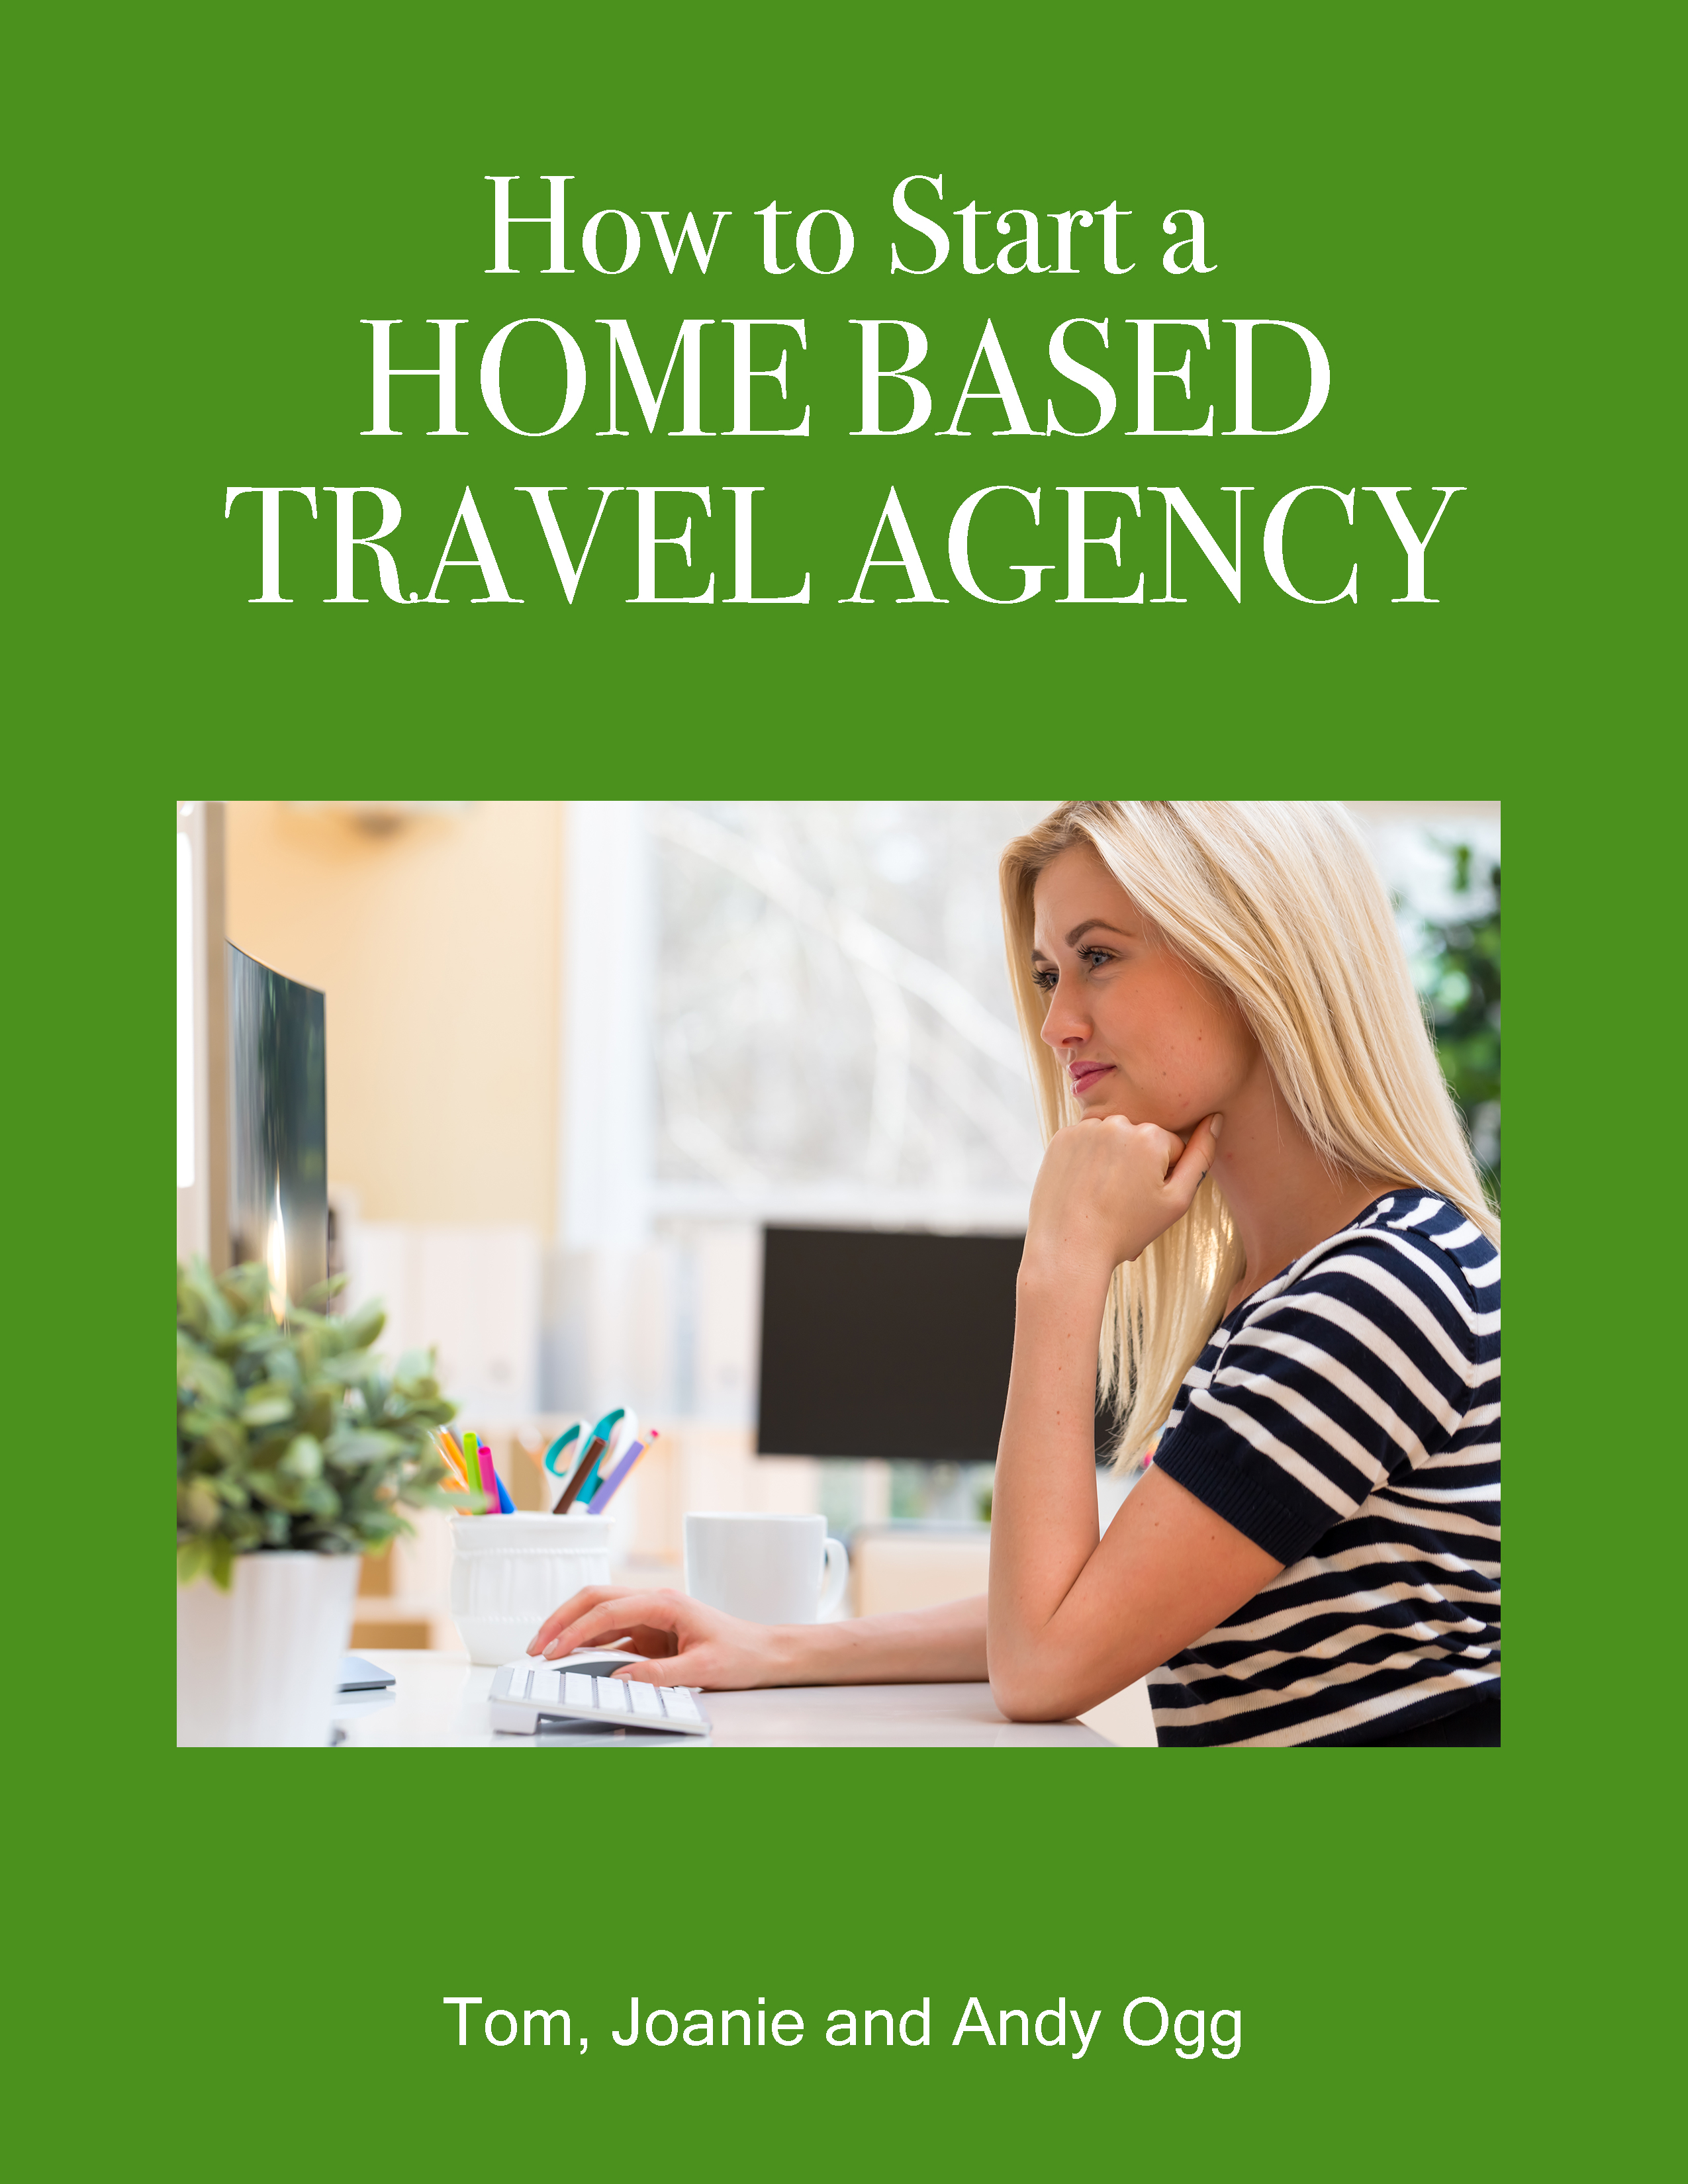 How to Start a Home Based Travel Agency - Study Guide ...